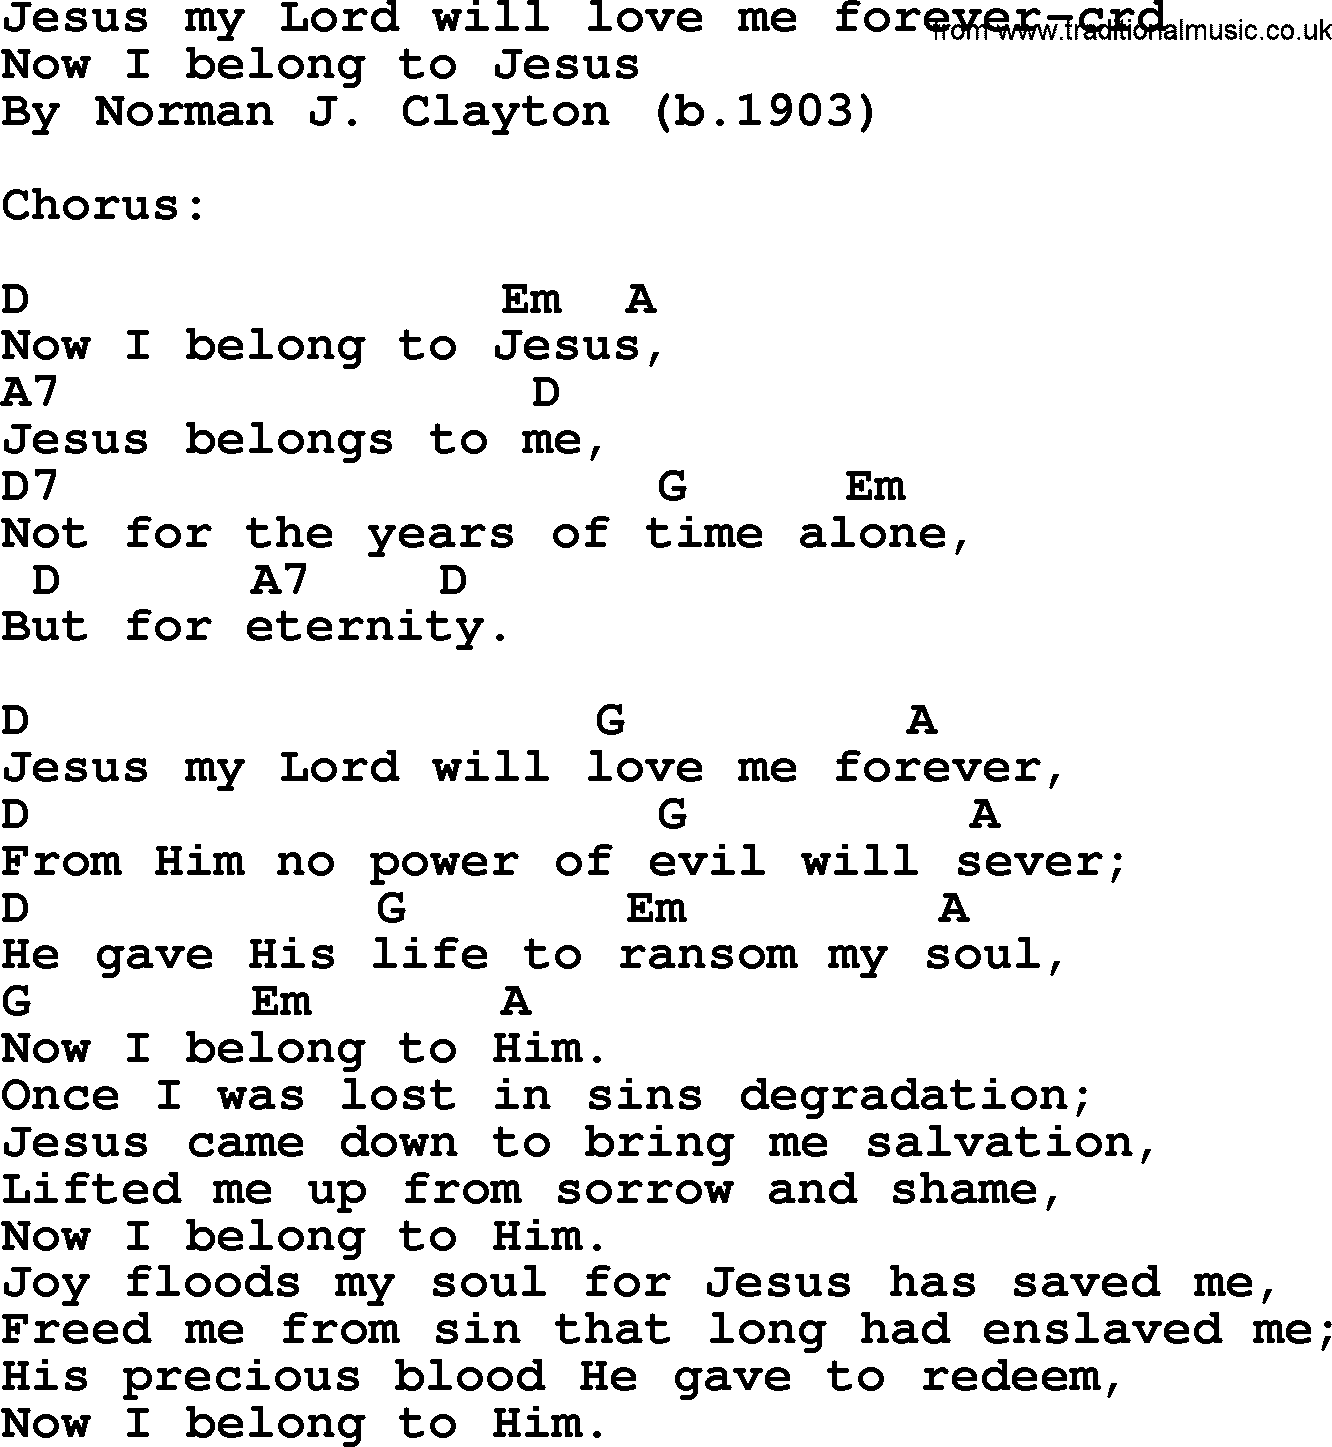 Forgiveness hymns, Hymn: Jesus My Lord Will Love Me Forever, lyrics chords and PDF